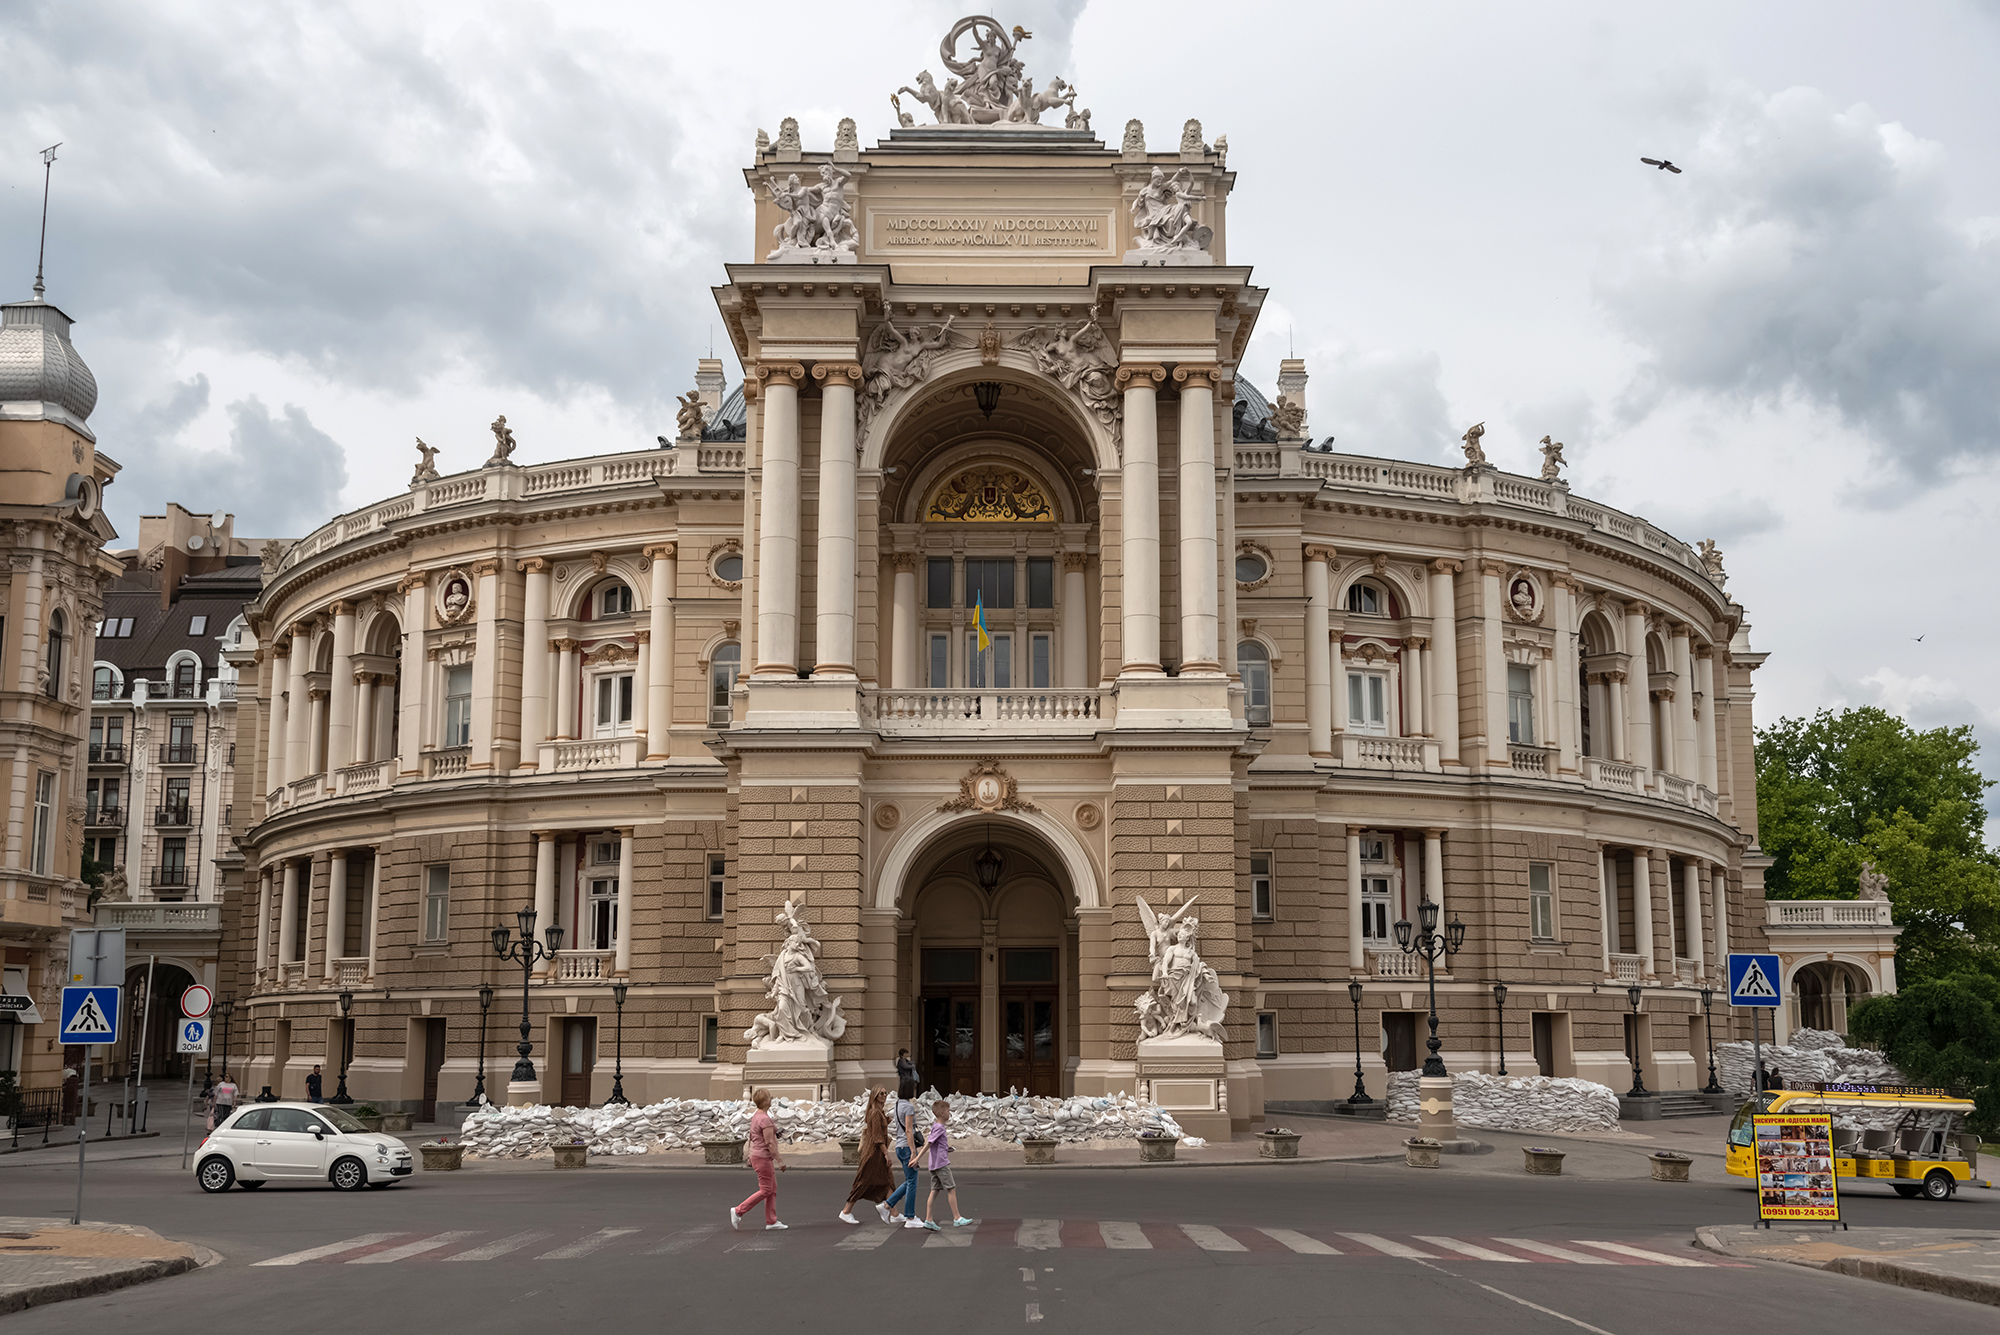 The National Academic Theatre of Opera and Ballet reopened in Odessa, Ukraine, on June 22.